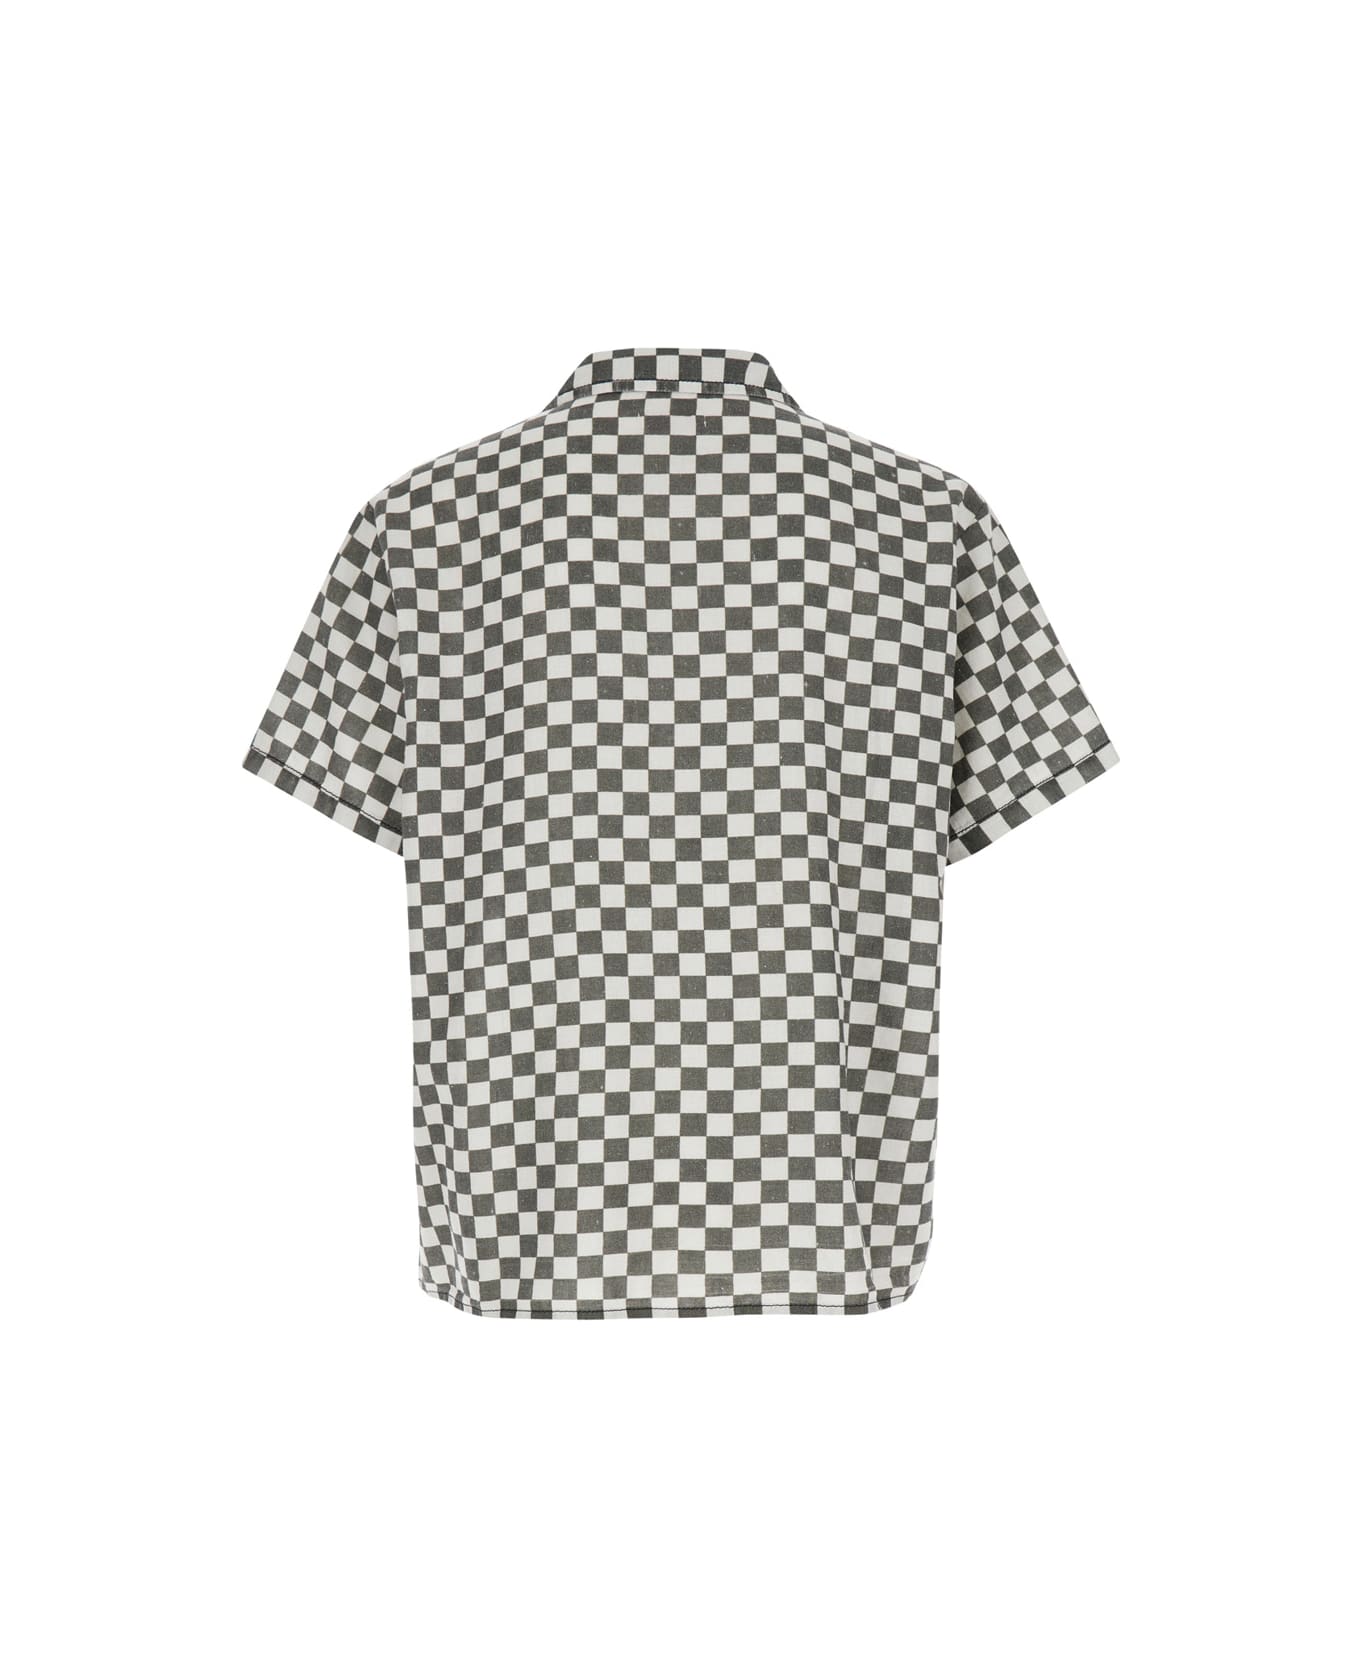 ERL Black And White Bowling Shirt With Check Motif In Cotton And Linen Man - Grey シャツ